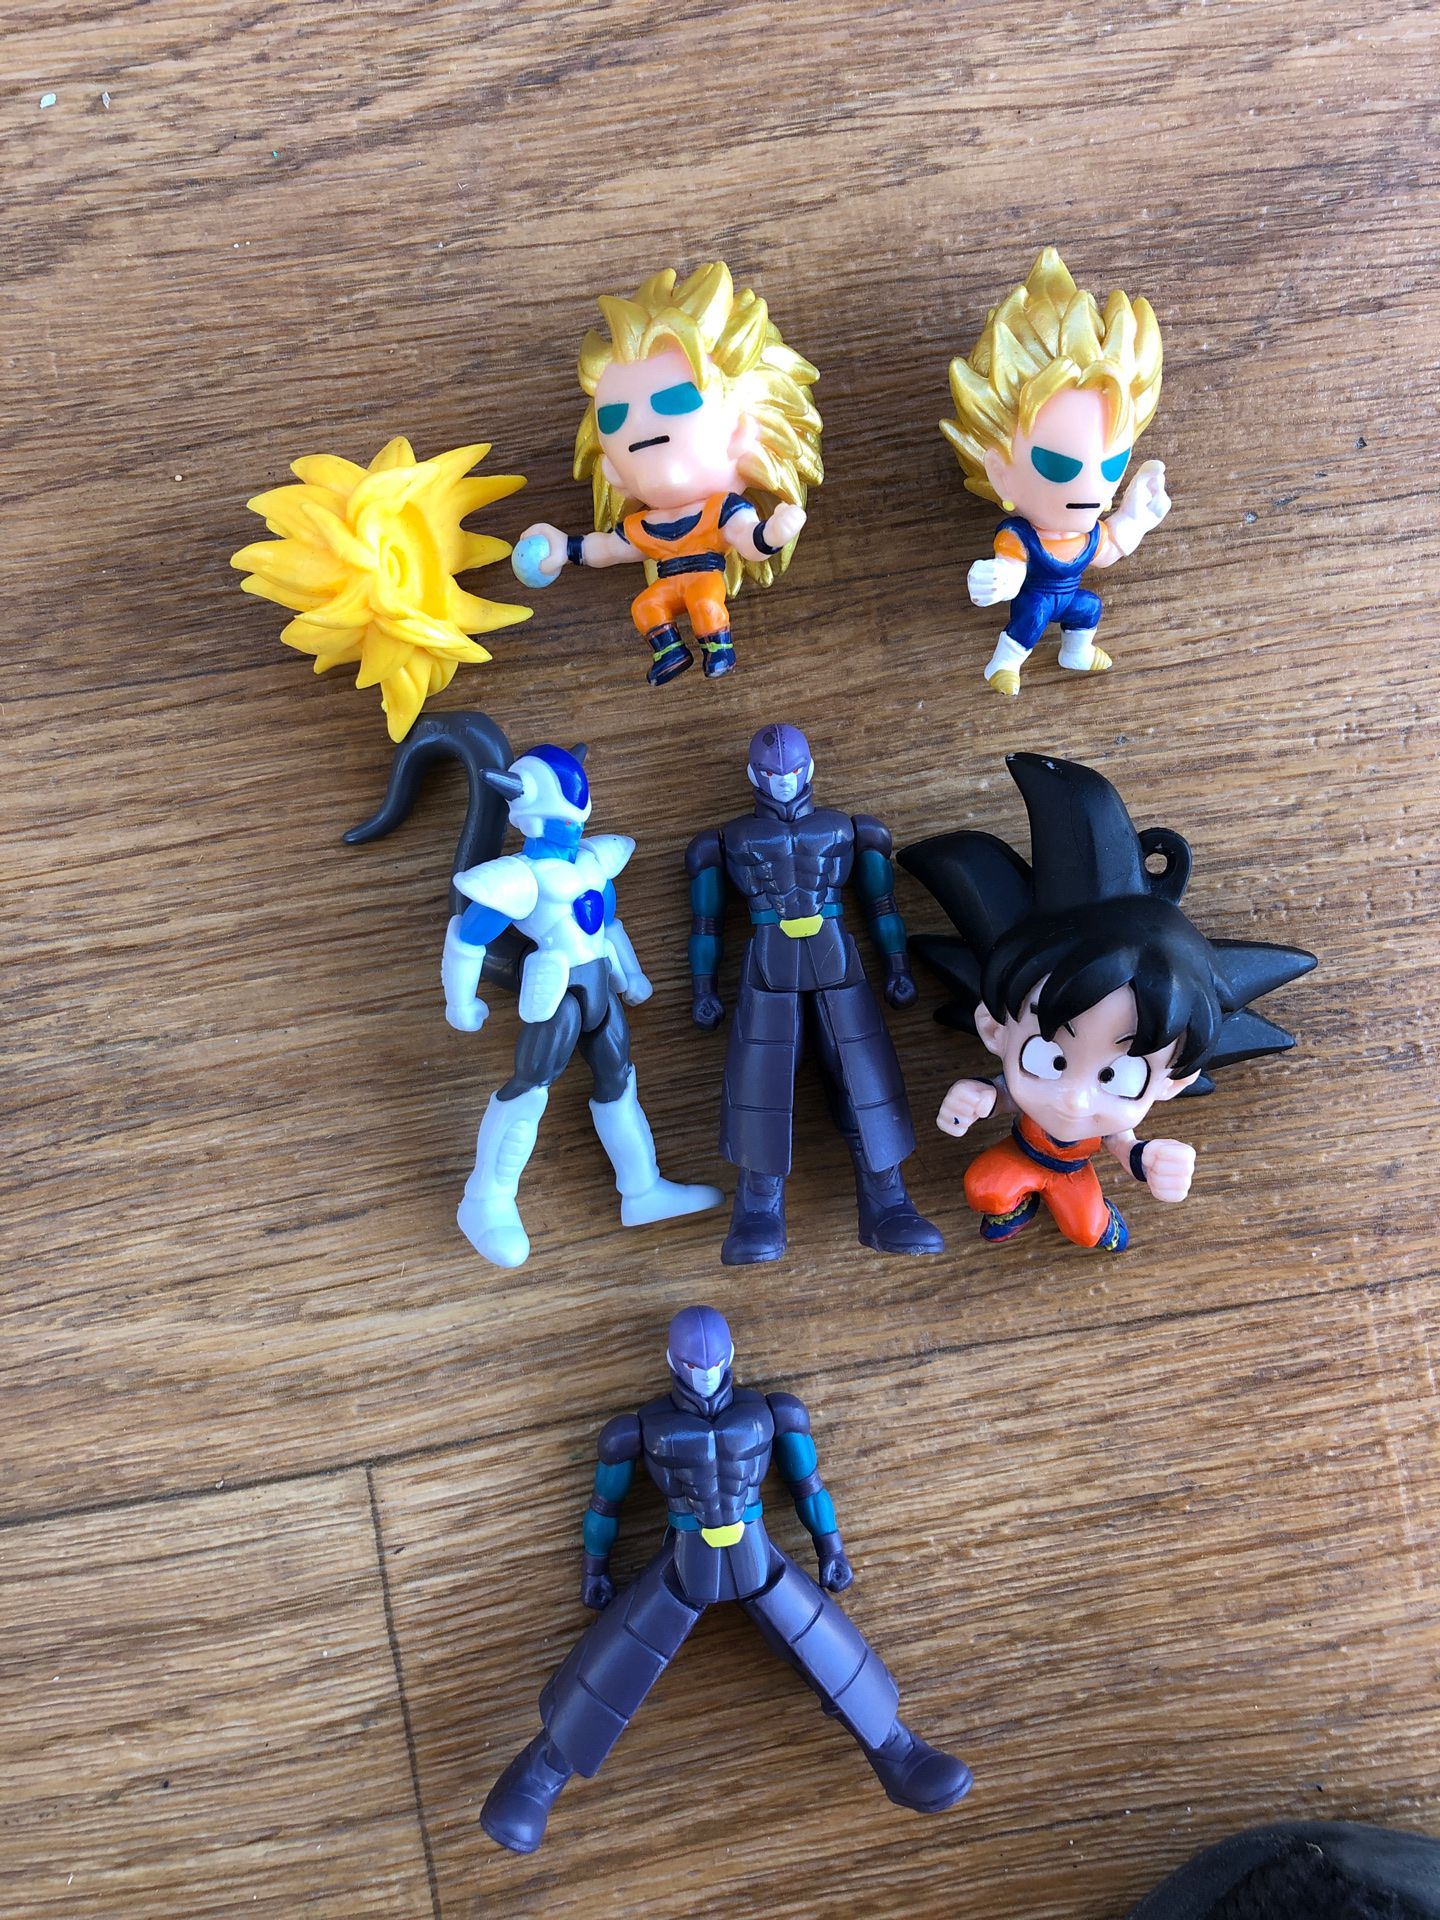 Lot of Dragon Ball Z / Super collectibles